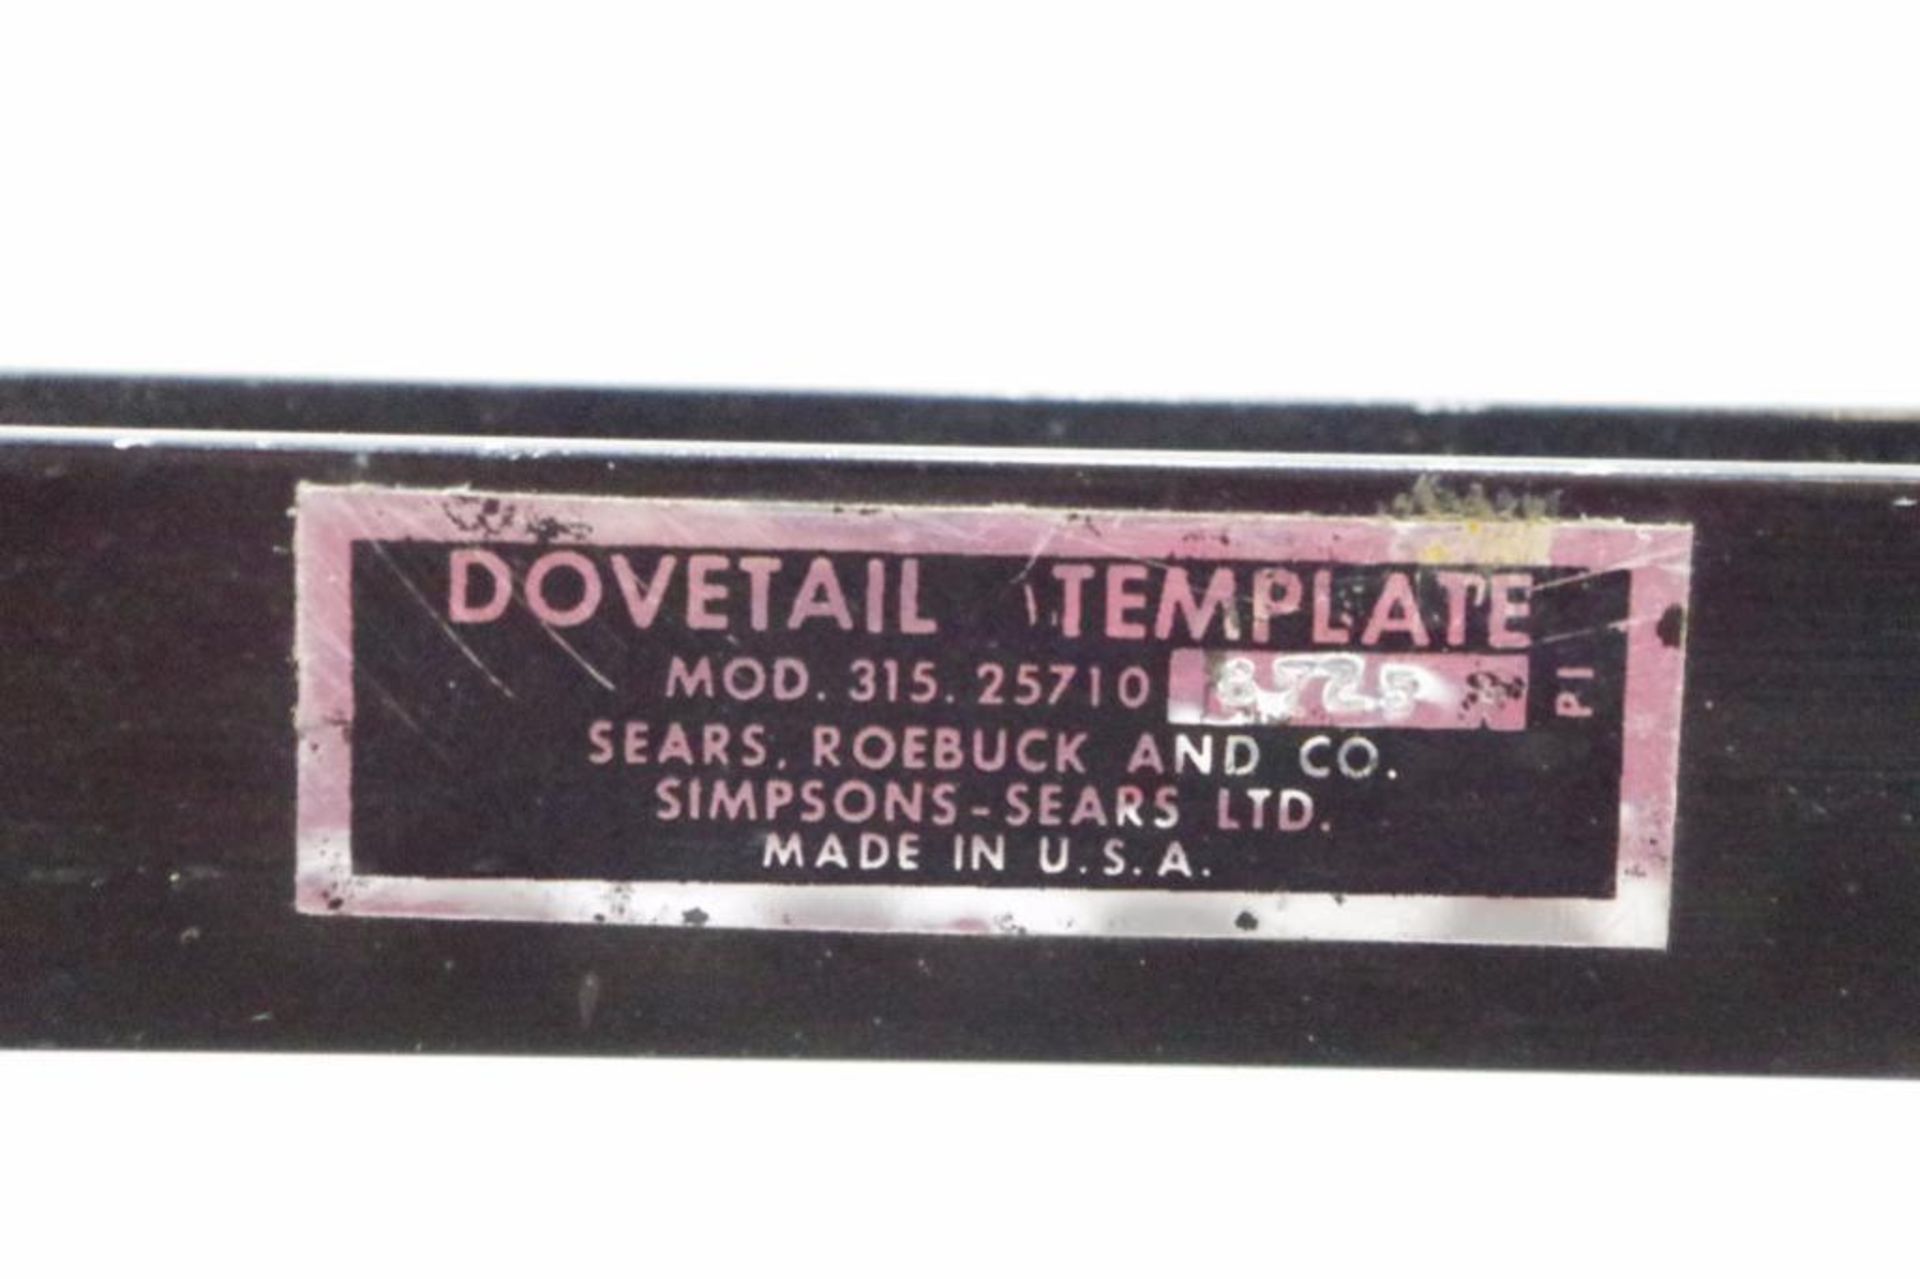 CRAFTSMAN Dovetail Template Fixture M/N 315.25710, Made in USA - Image 4 of 4